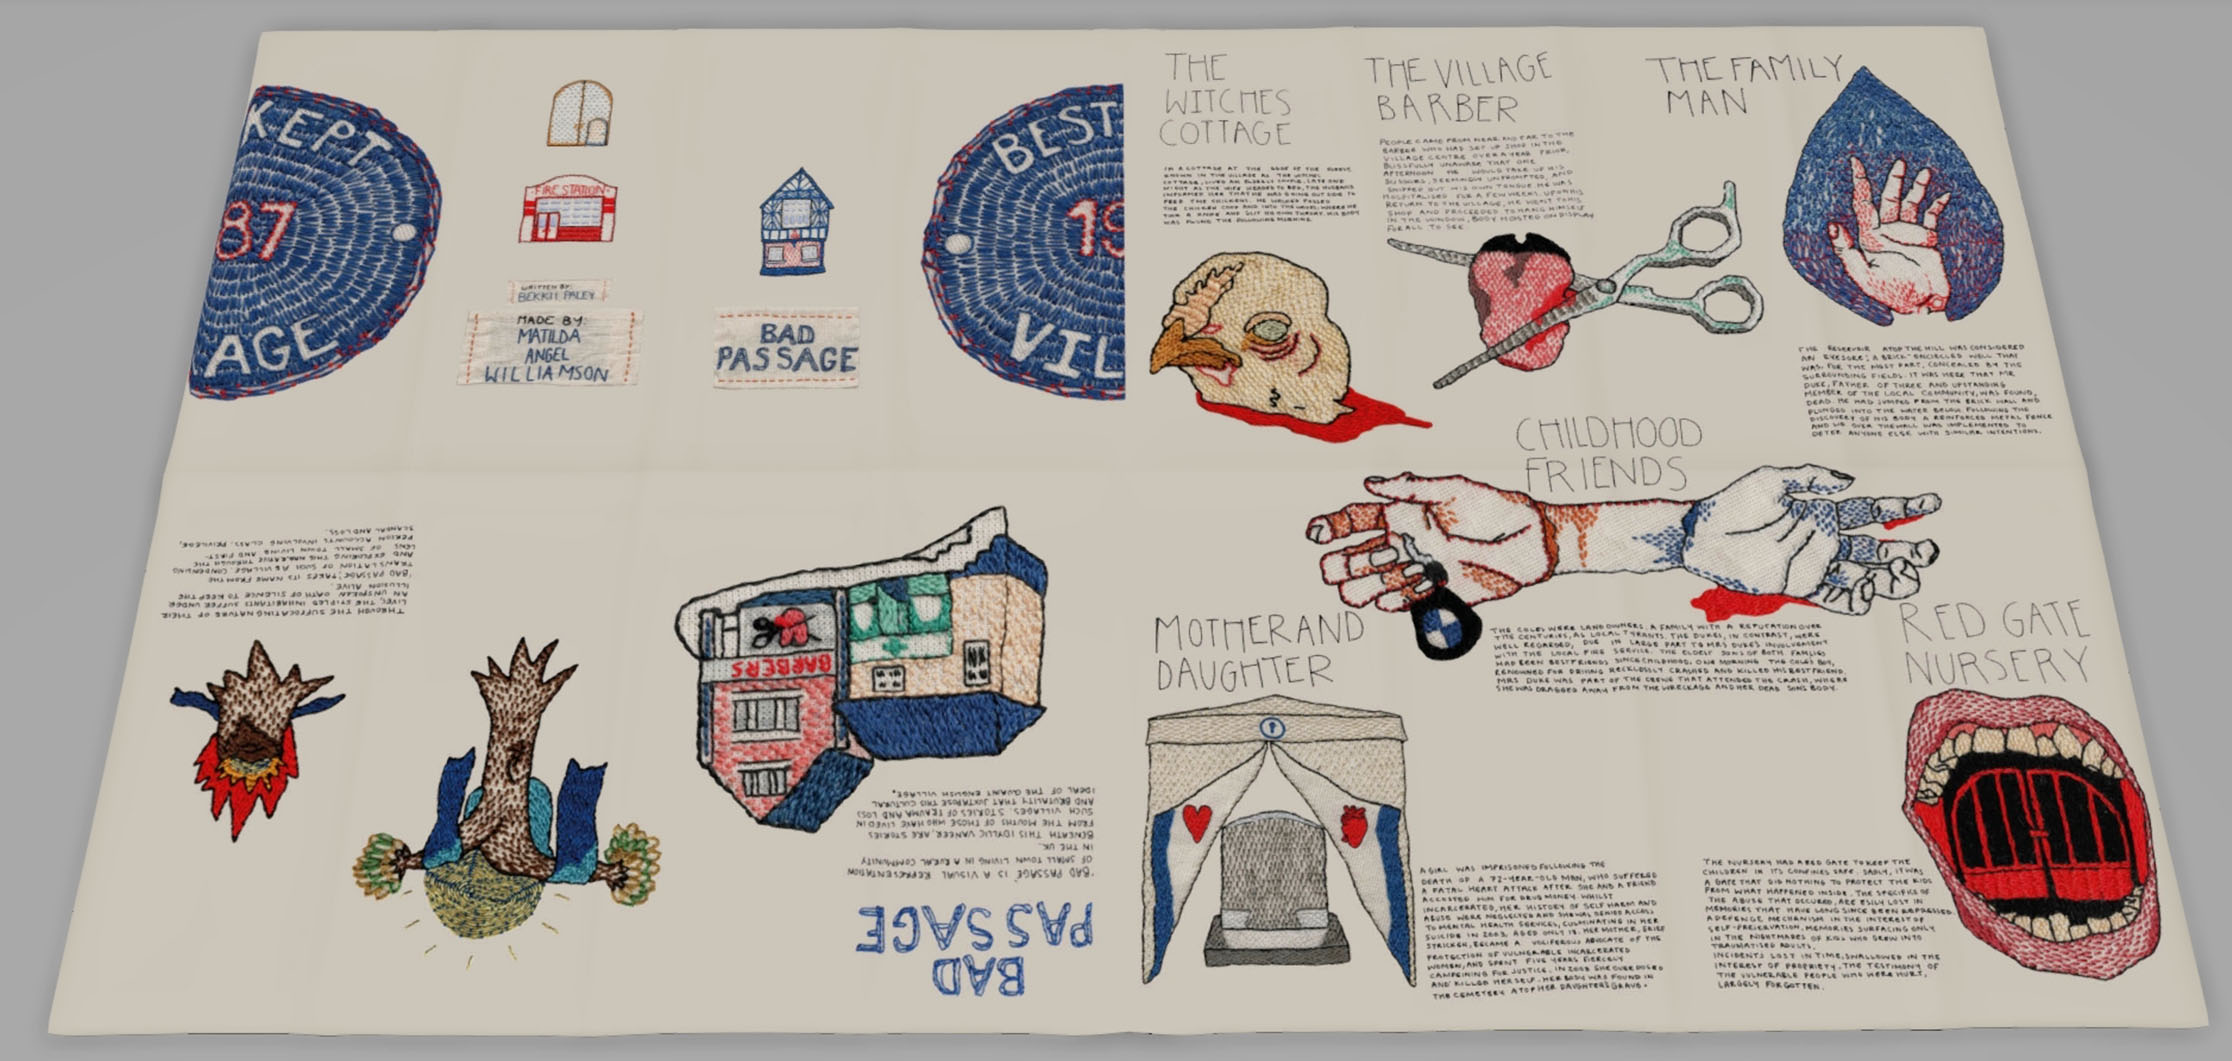 Photograph of fold-out poster featuring embroidered illustrations